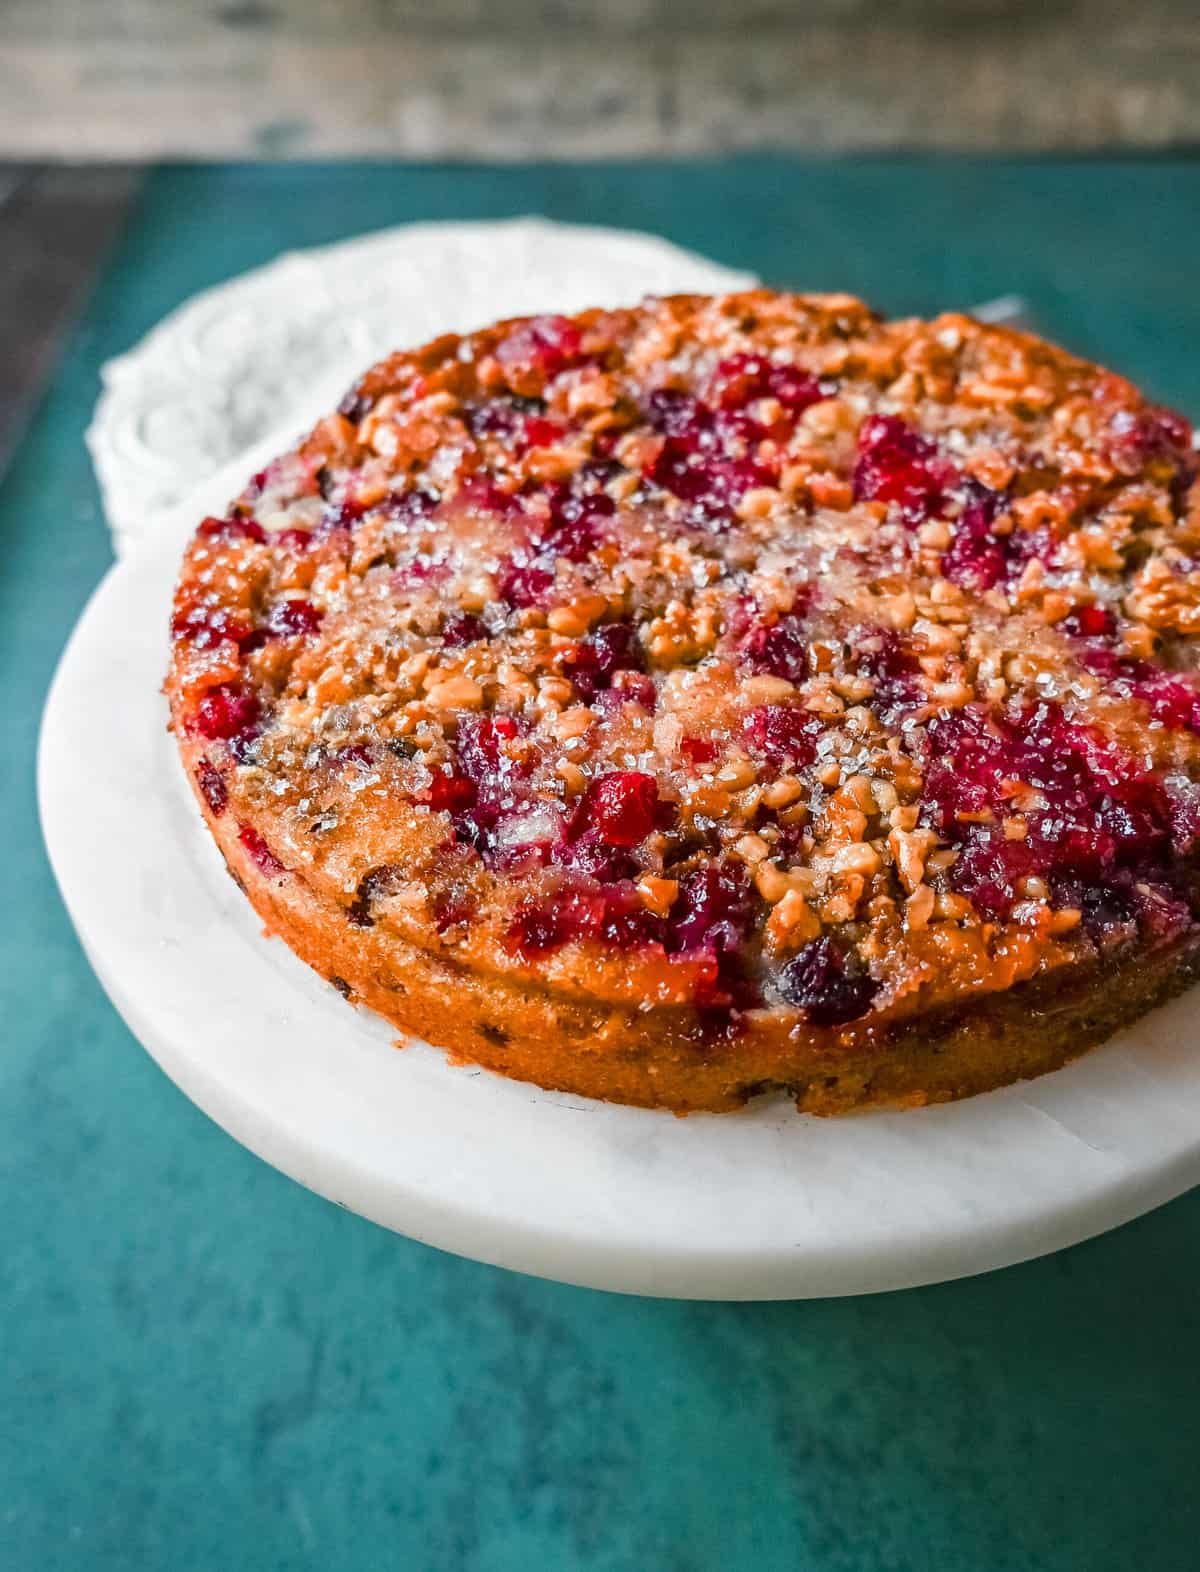 Nantucket Cranberry Pie. This popular dessert is a moist almond cake paired with tart cranberries and nuts that is a staple at holiday gatherings. The cranberry cobbler is always a hit and pairs so well with fresh whipped cream or vanilla bean ice cream.